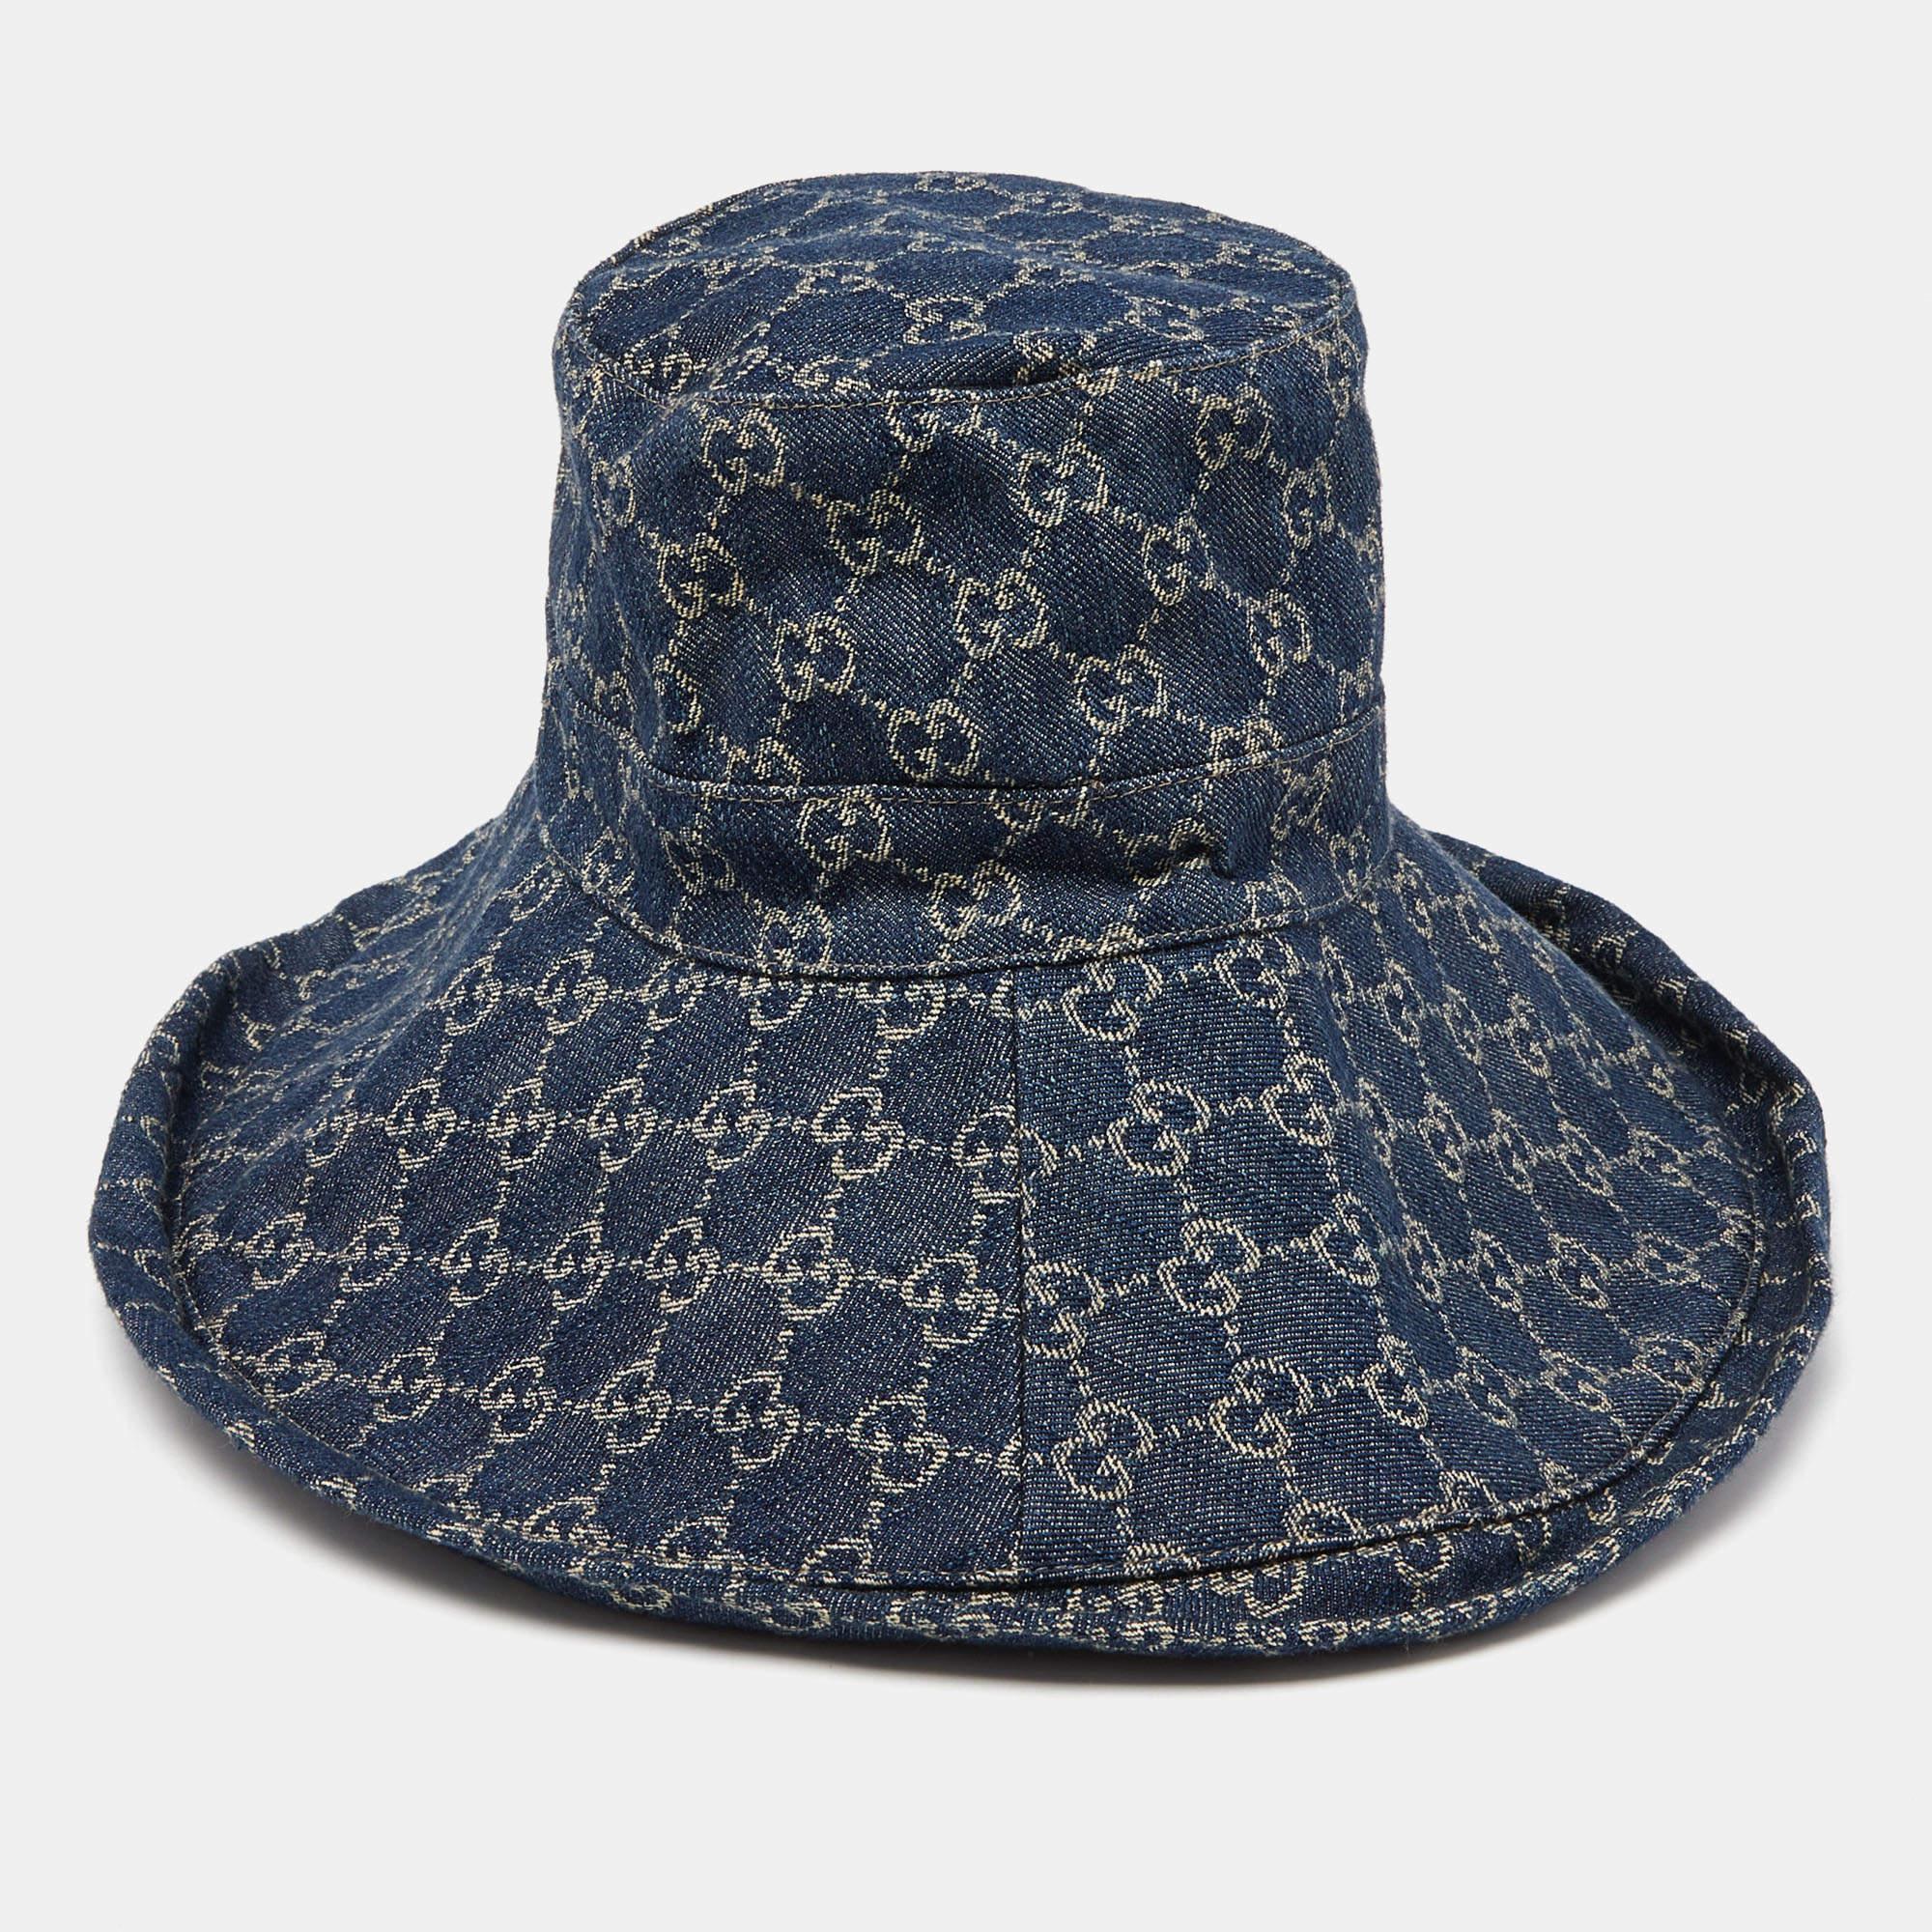 Head out looking chic with this bucket hat from Gucci. It has been made using Monogram denim, thus making it the perfect summer accessory. It has a wide brim.

